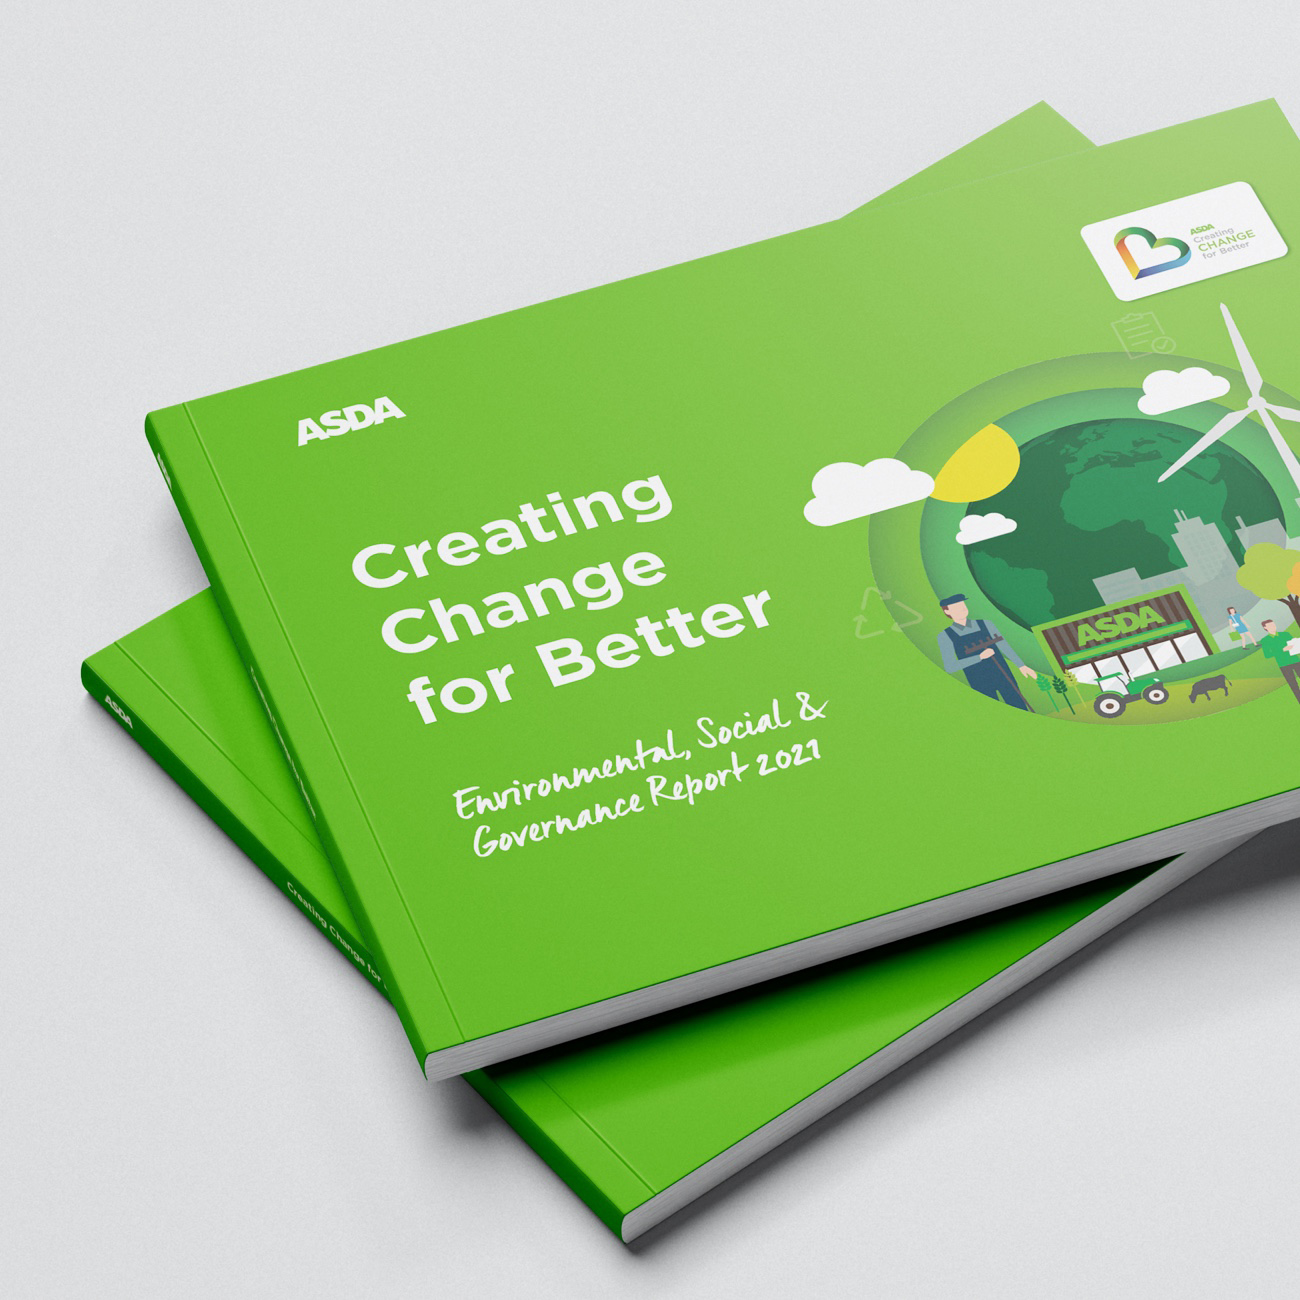 Partnering with Asda to deliver their 2022 ESG report